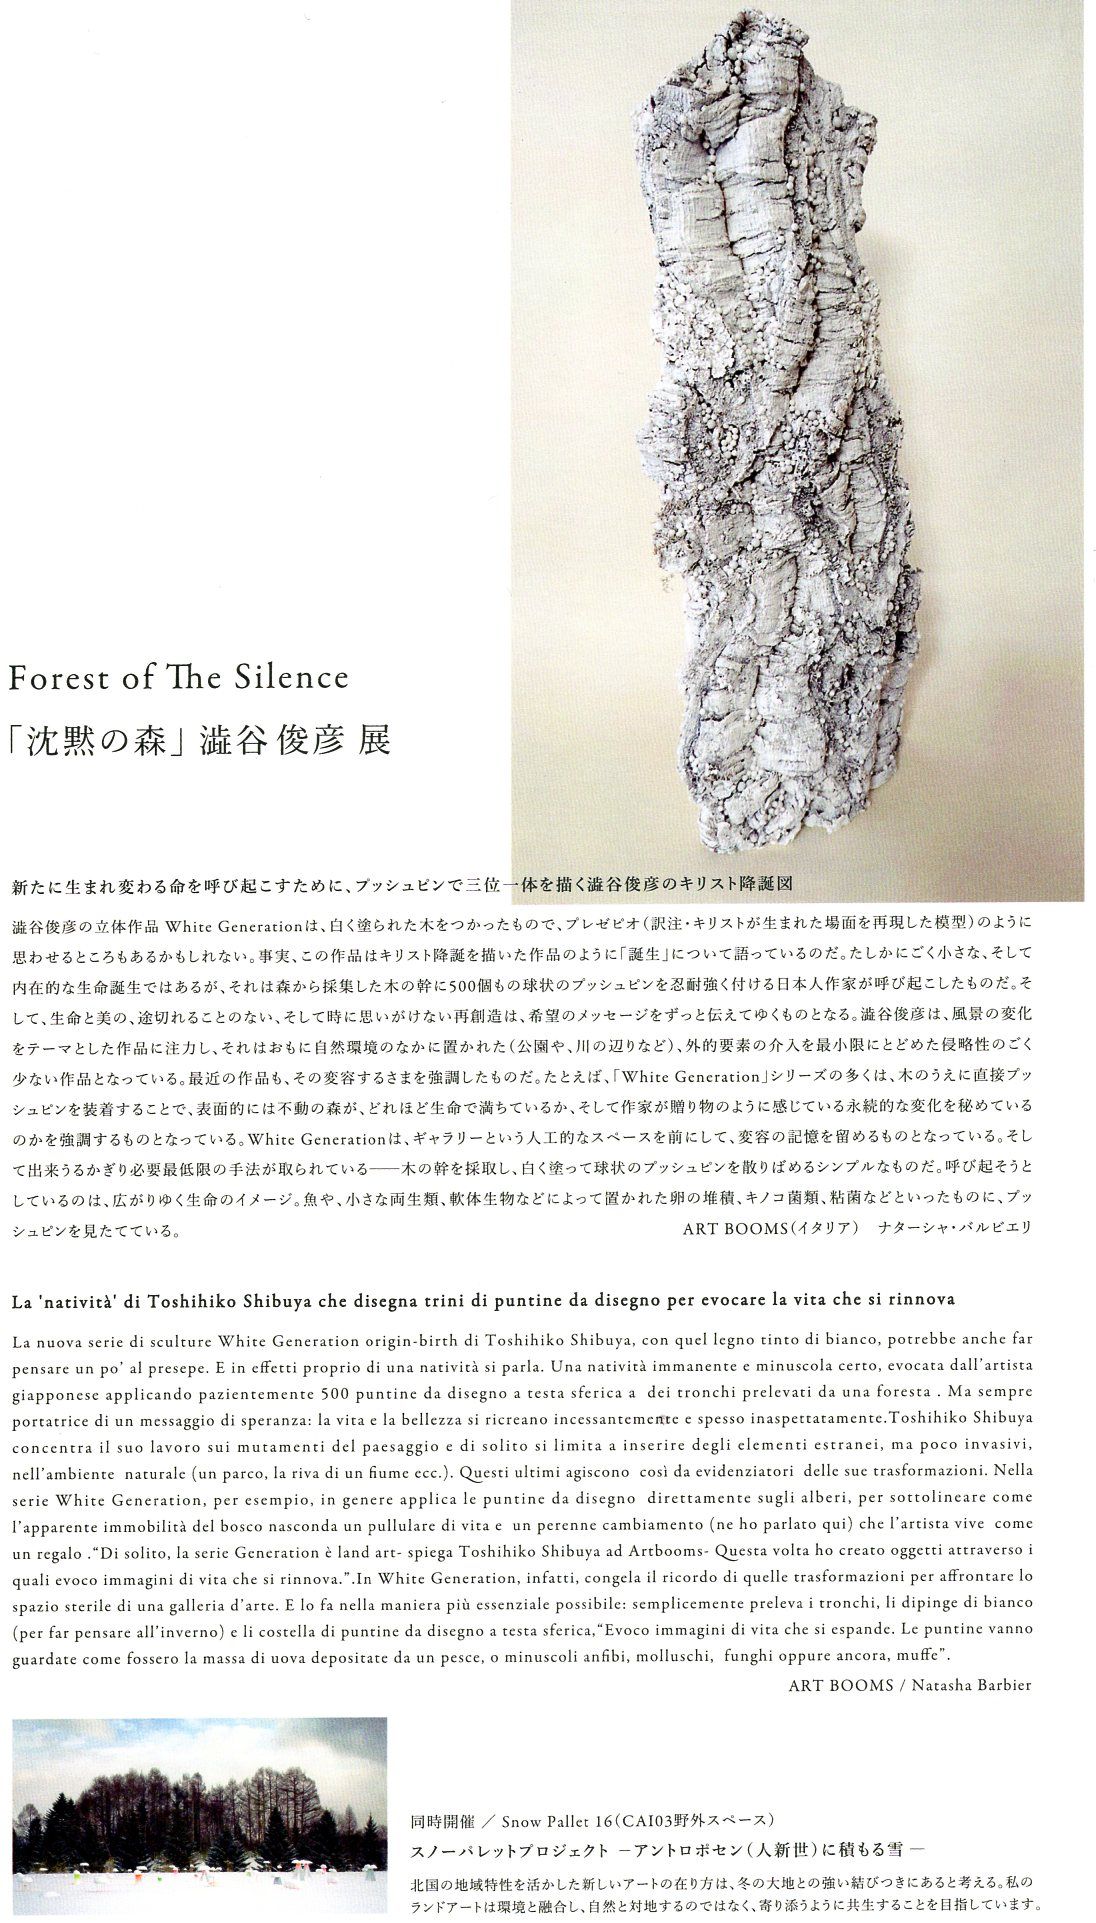 Forest of The Silence「沈黙の森」澁谷俊彦展  イメージ画像